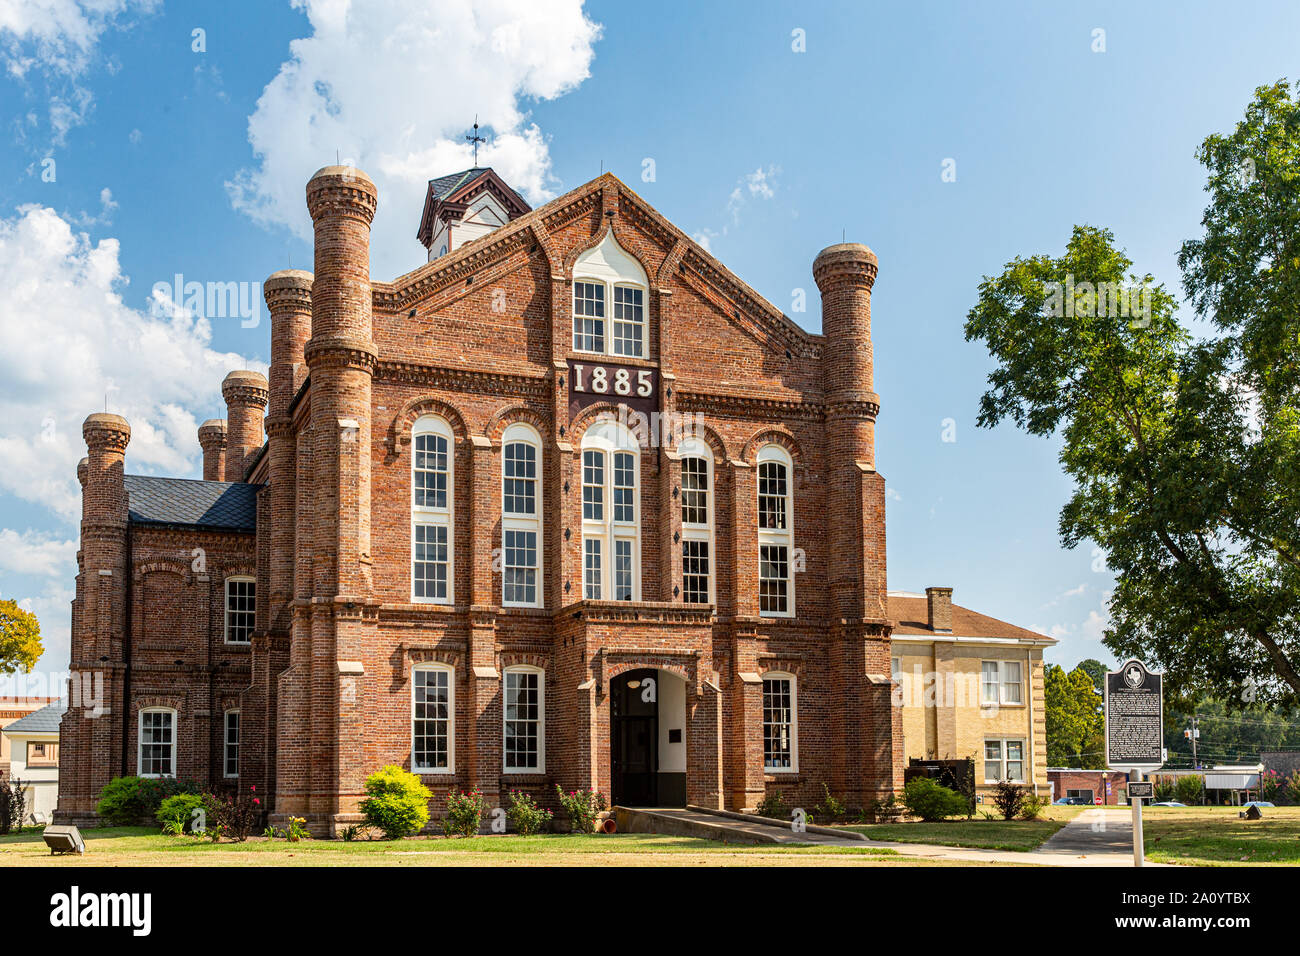 Another view of the historic 1885 Shelby county jail in Center, Texas Stock Photo